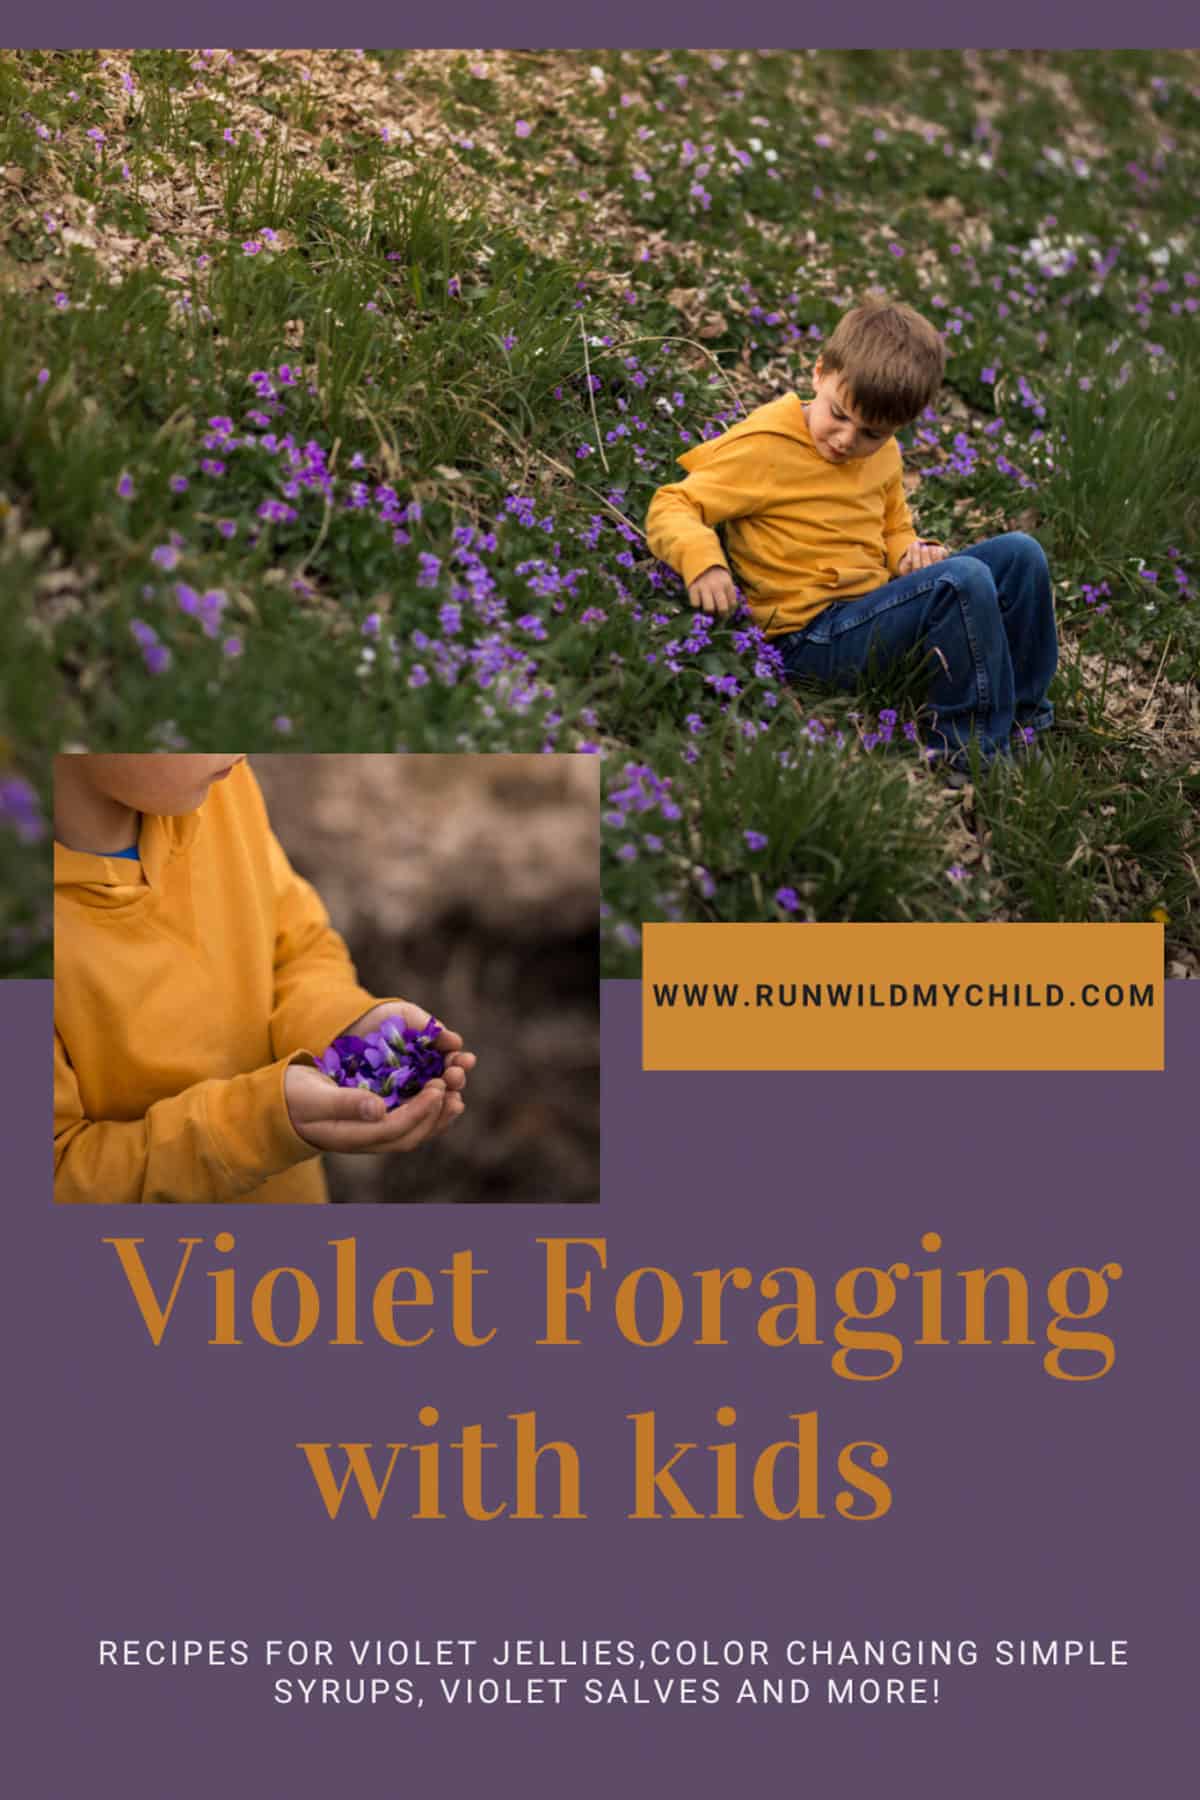 Violet foraging with kids 